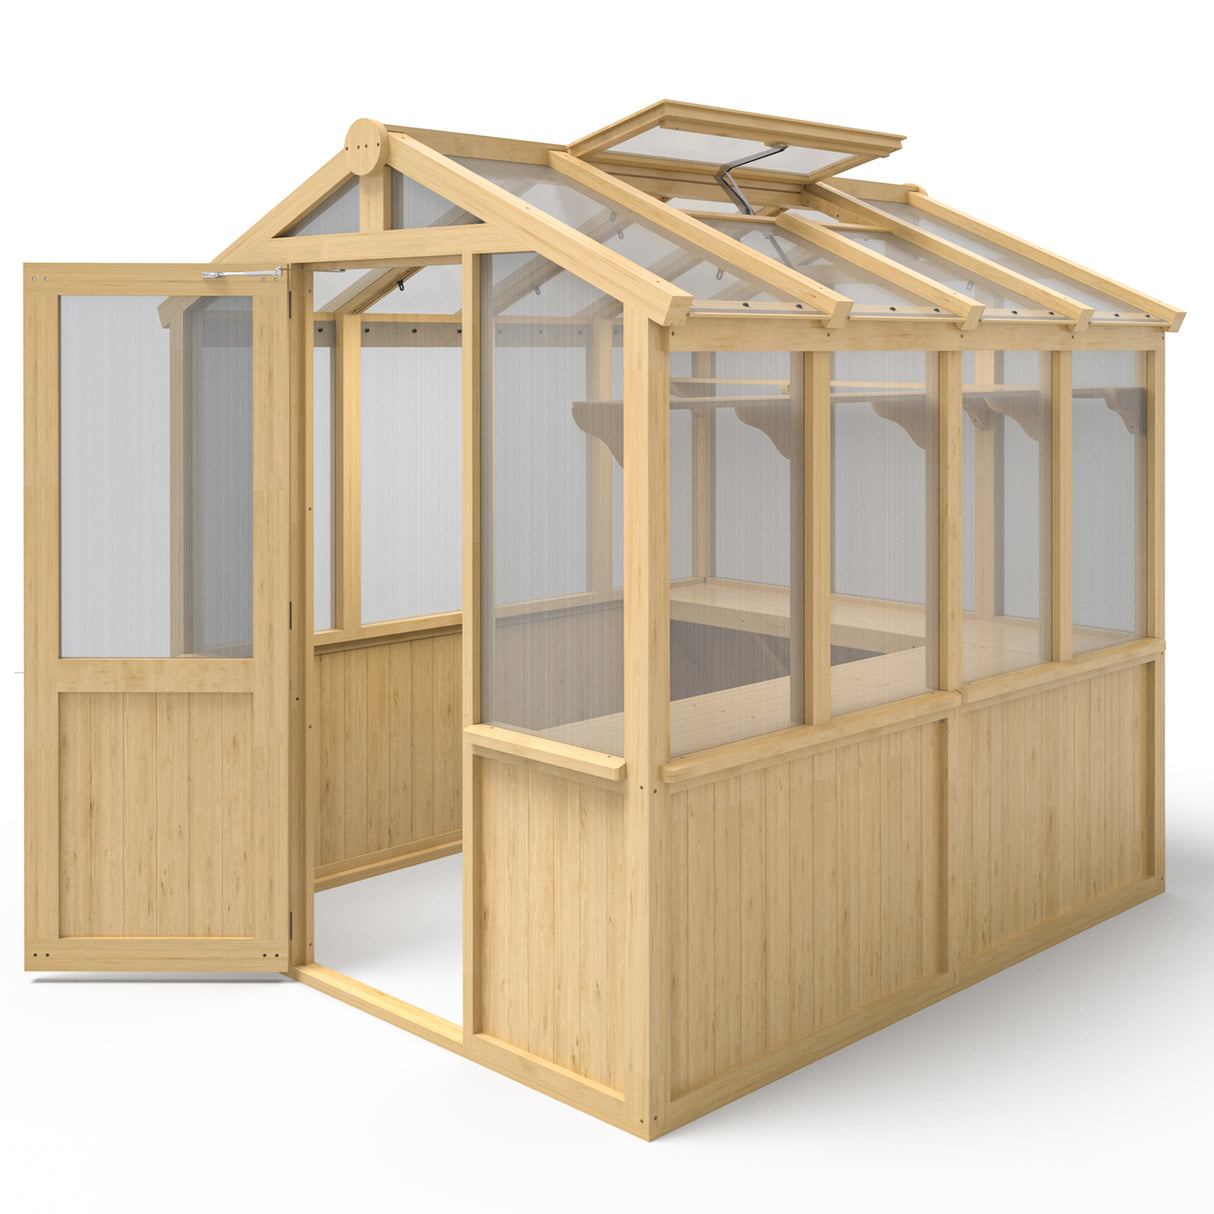 EAGLE PEAK 7.5x6.7x7.7 Wood and Polycarbonate Walk-in Greenhouse